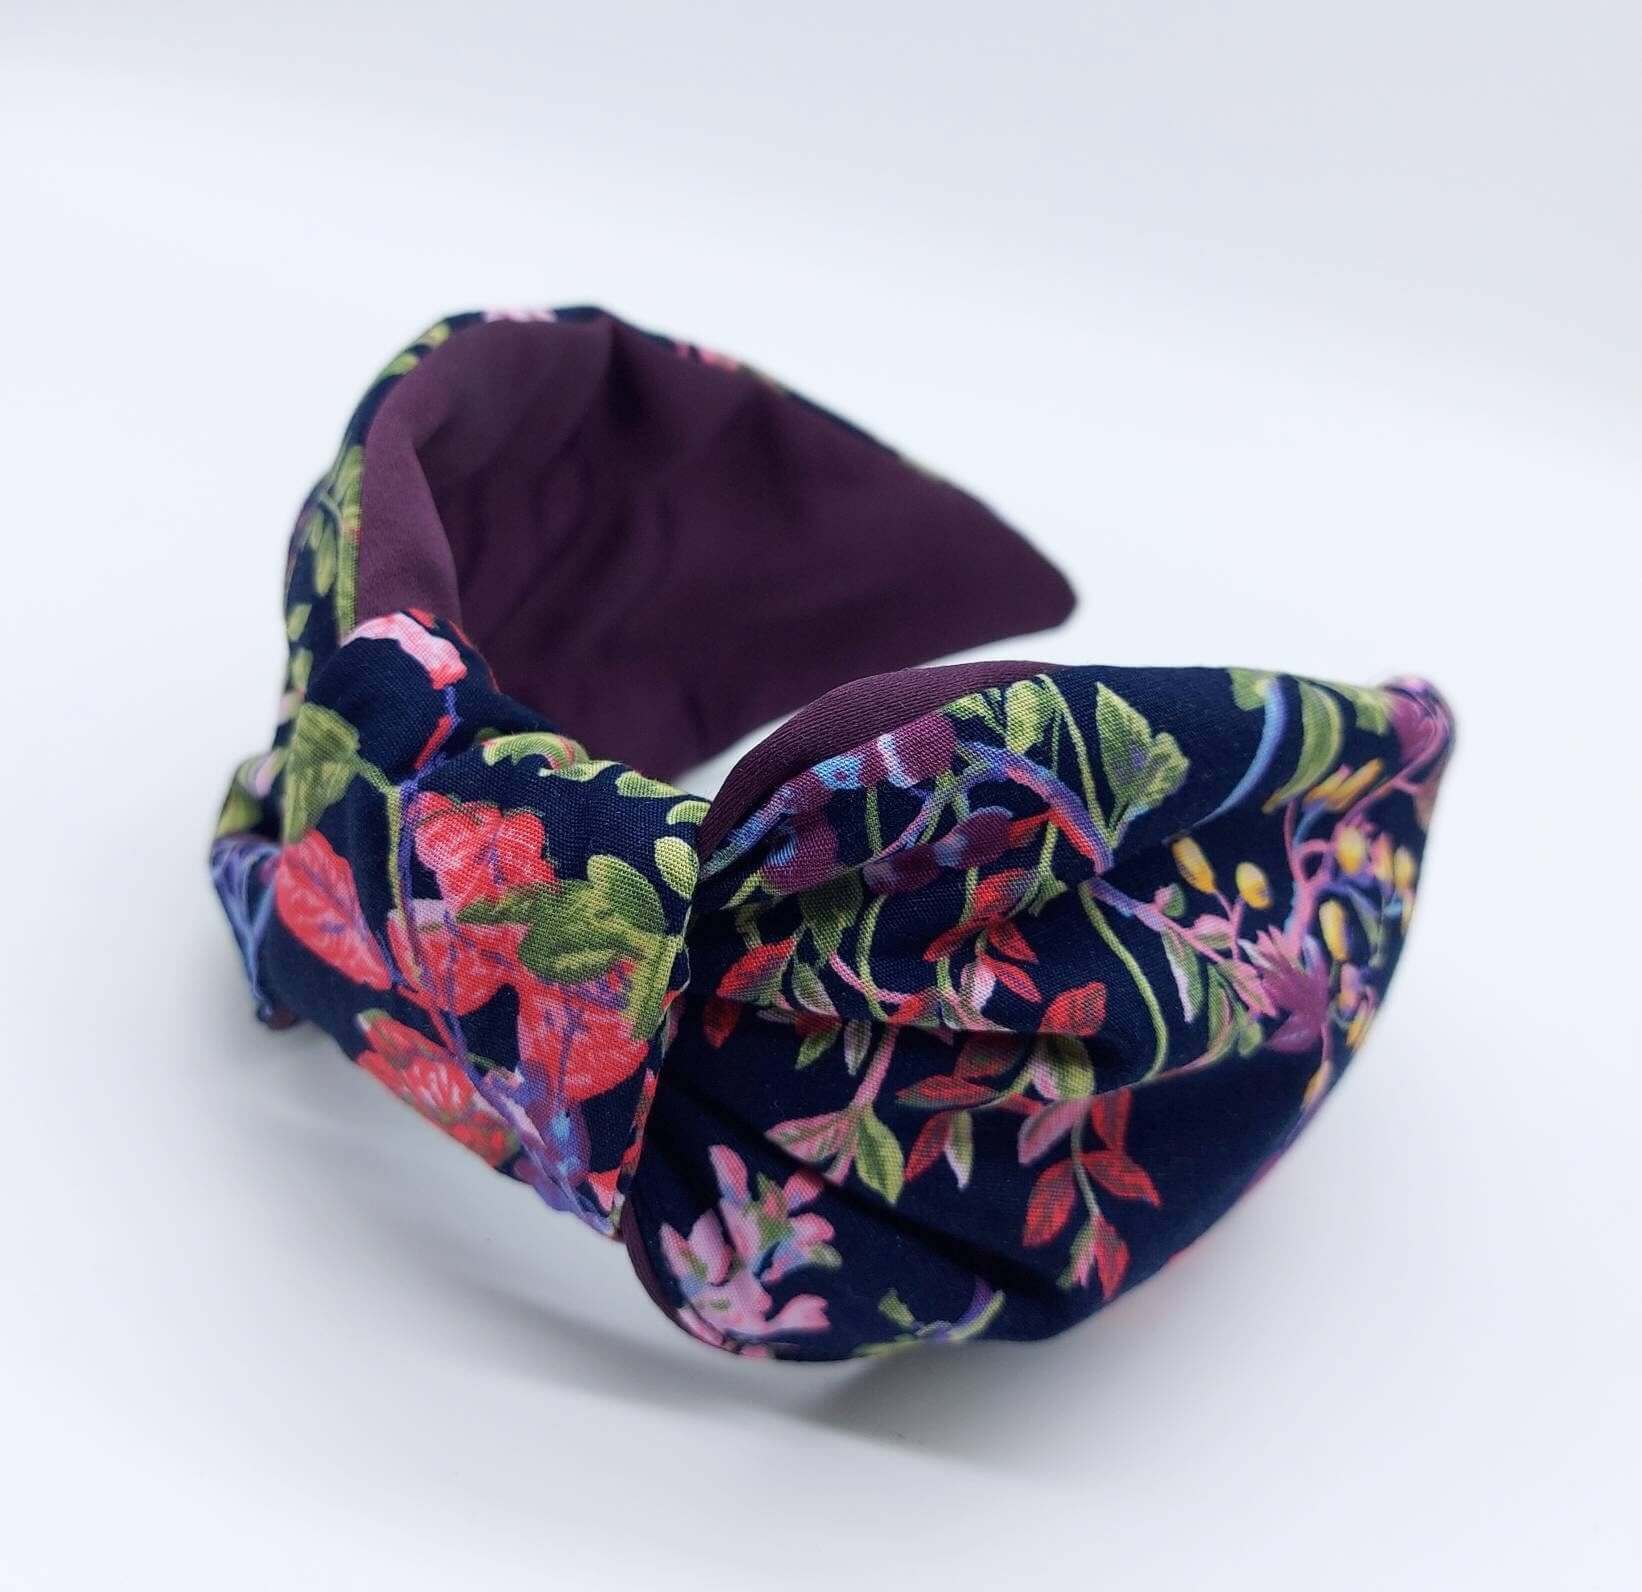 A bow-style, navy blue, red, purple and green floral fabric knot headband with purple satin lining underneath.